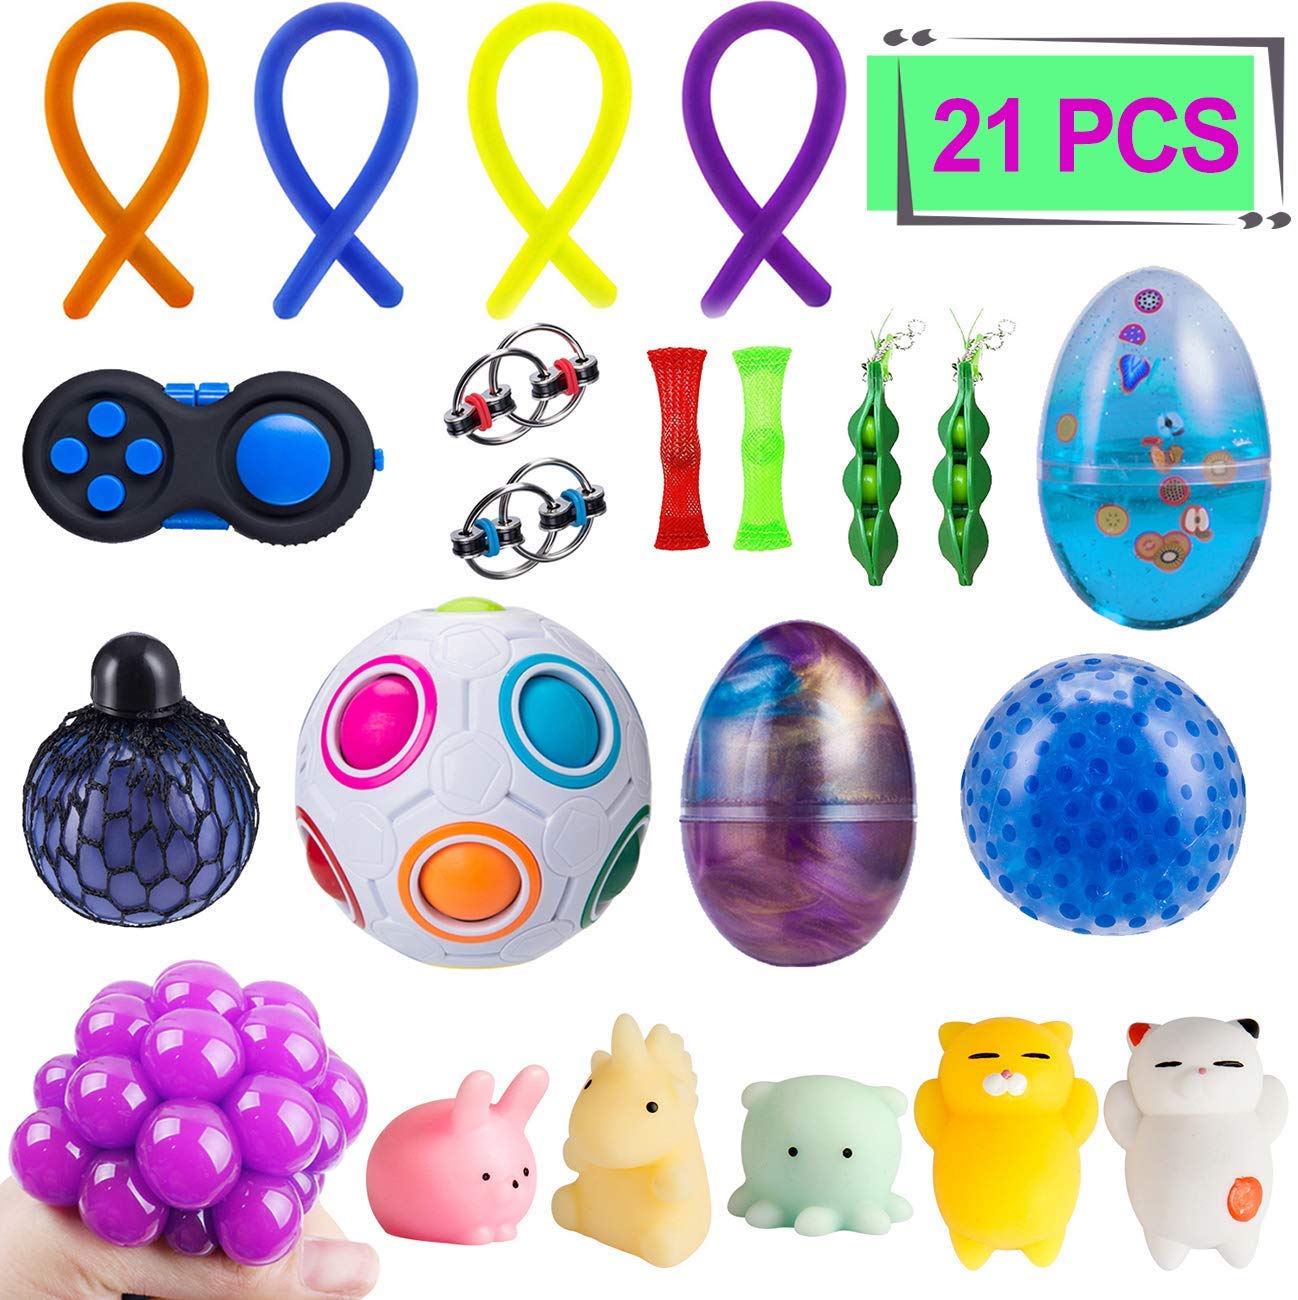 Details about   12PCS Fidget Sensory Toys Set Stocking Stuffer For Stress Relief Anti-Anxiety US 